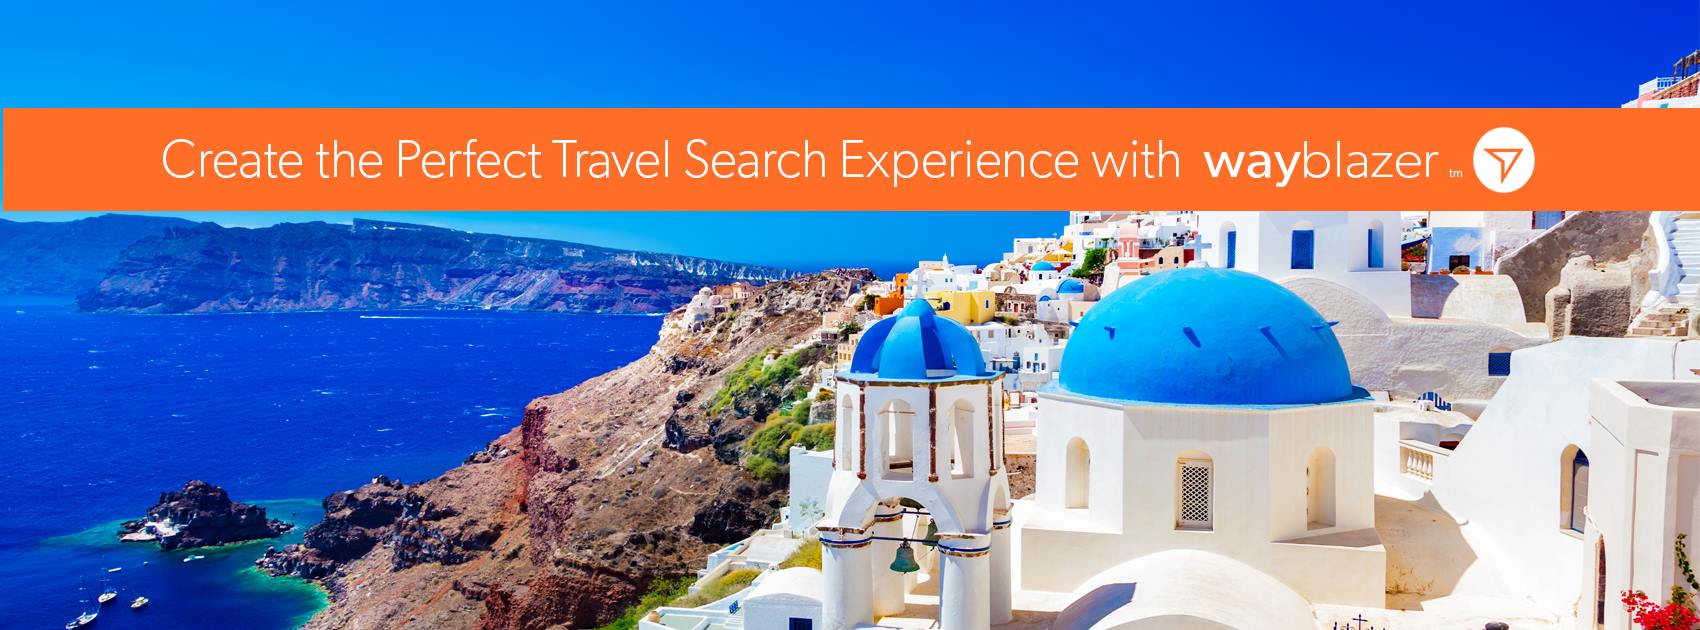 Create the perfect travel search experience with Artificial Intelligence